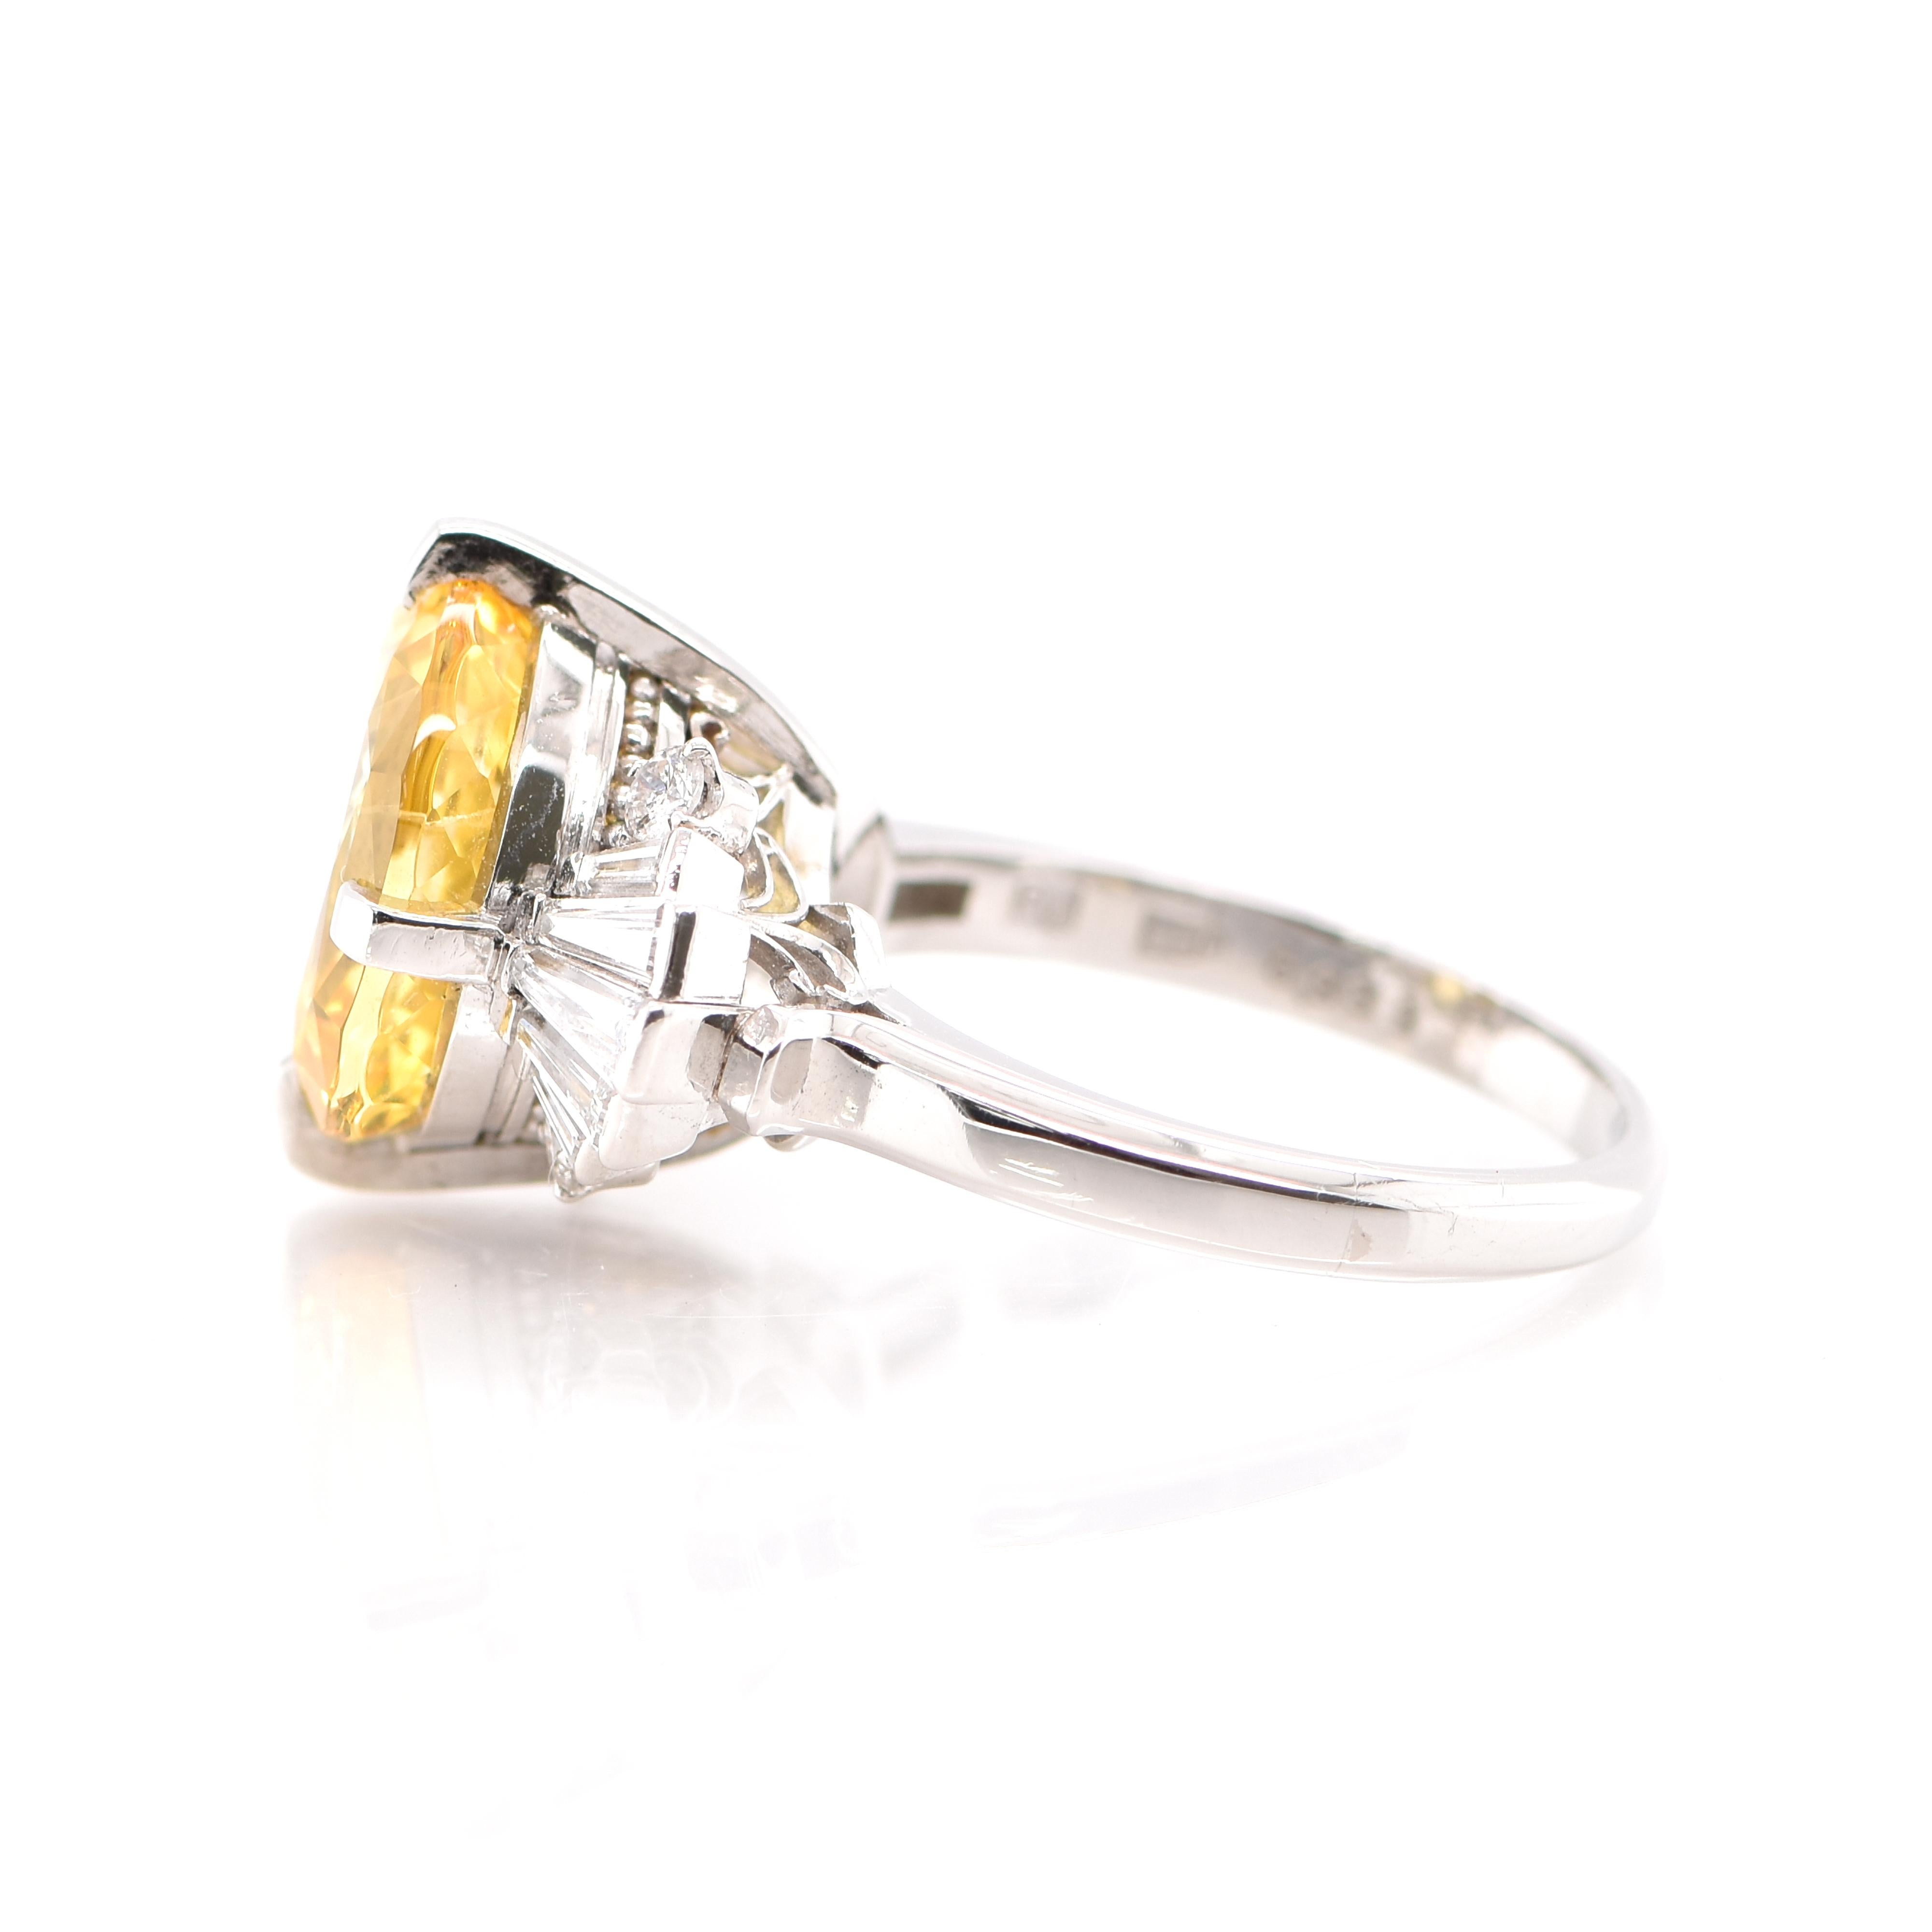 Oval Cut 6.93 Carat Untreated Yellow Sapphire and Diamond Ring Set in Platinum